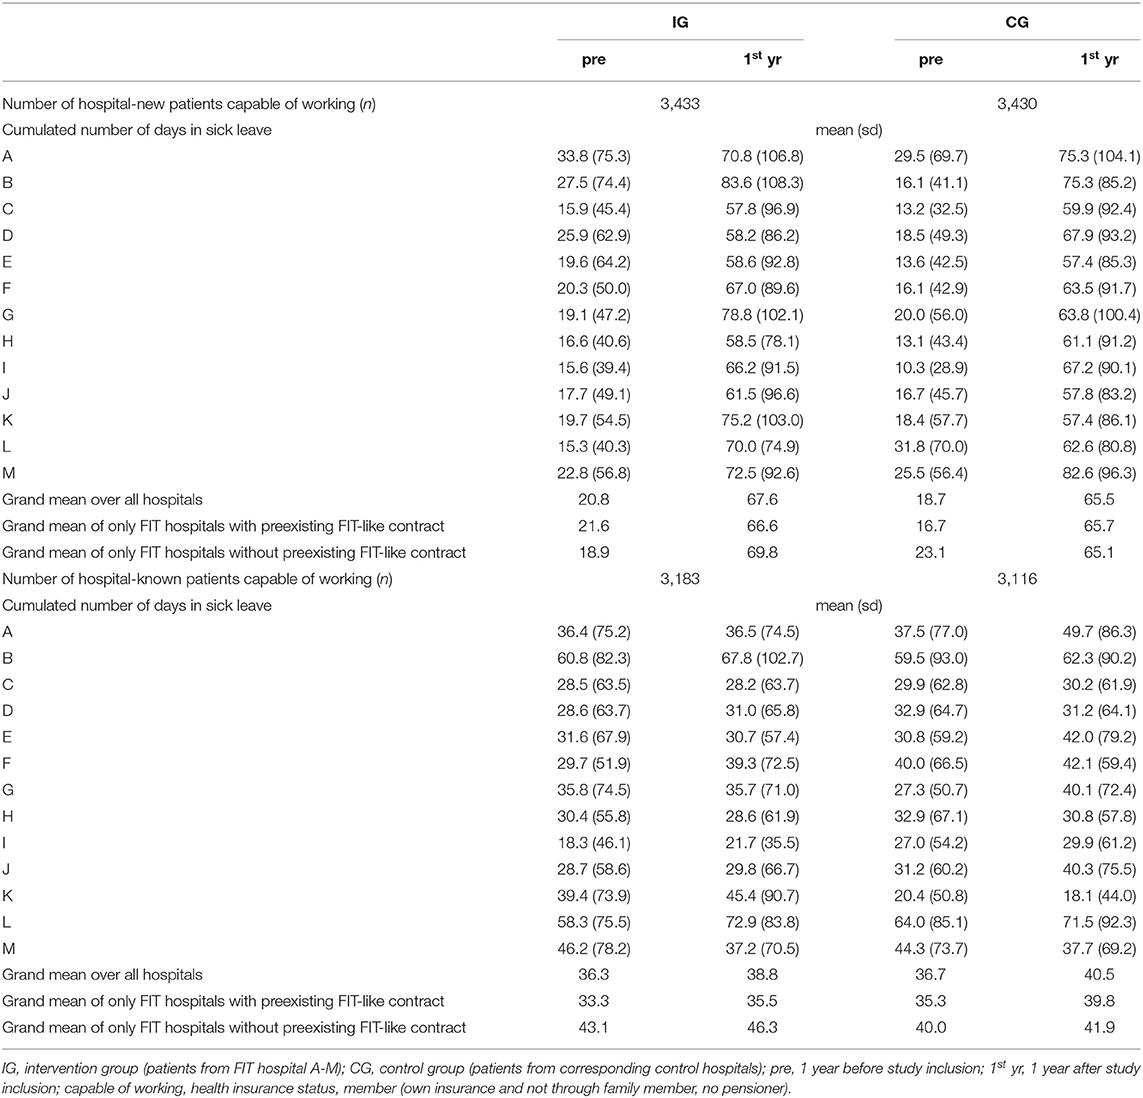 Frontiers Effectiveness Of Global Treatment Budgets For Patients With Mental Disorders Claims Data Based Meta Analysis Of 13 Controlled Studies From Germany Psychiatry